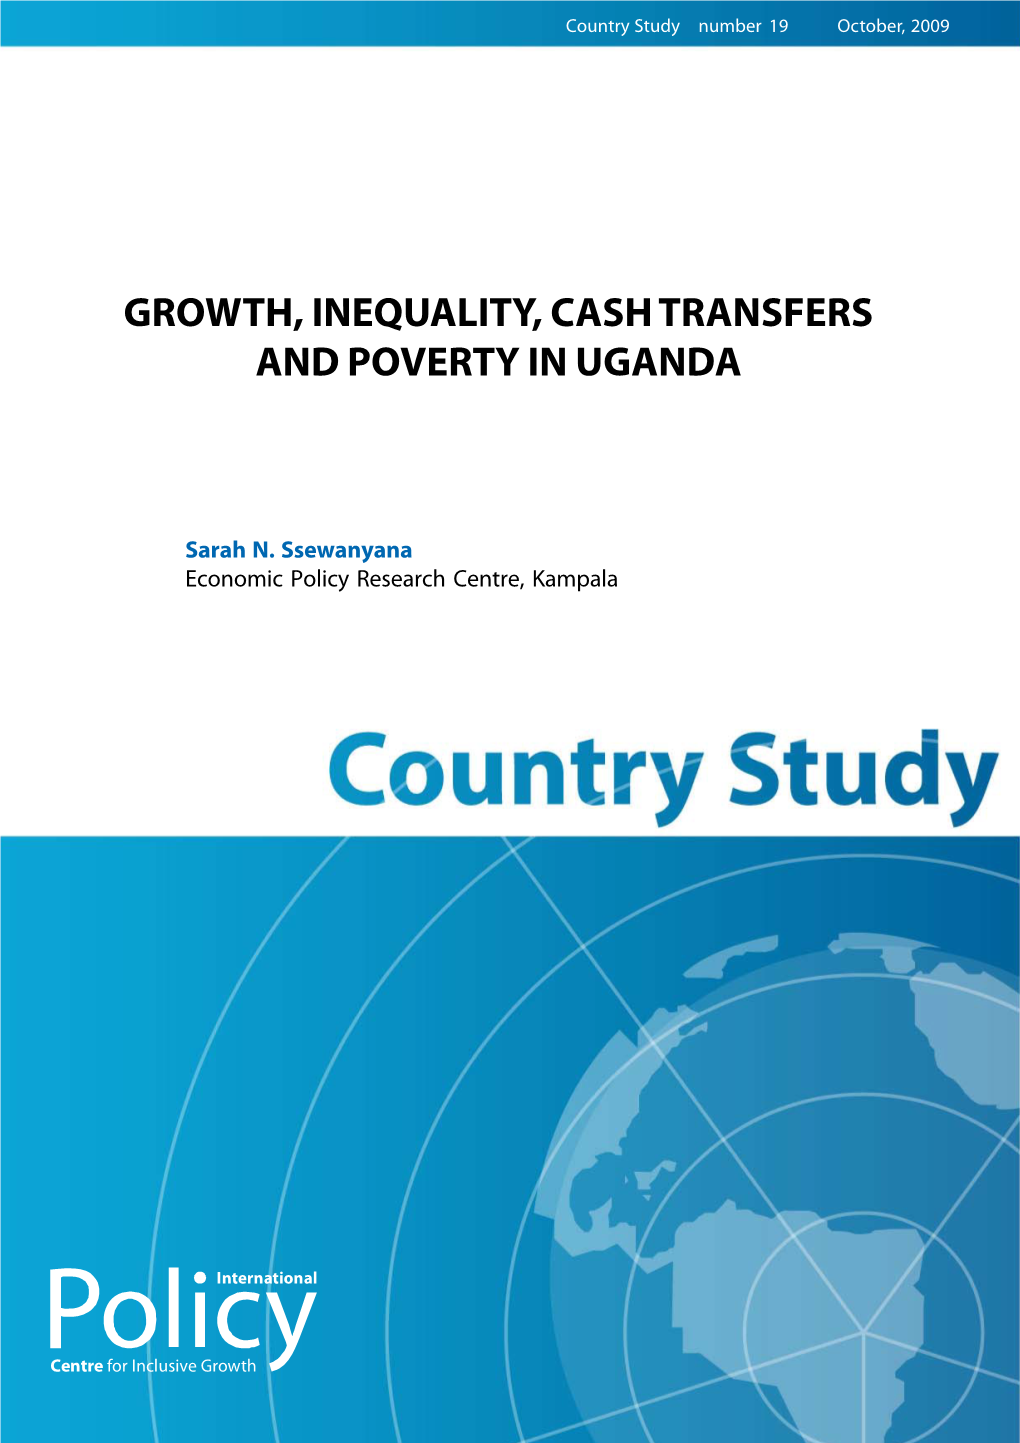 Growth, Inequality, Cash Transfers and Poverty in Uganda